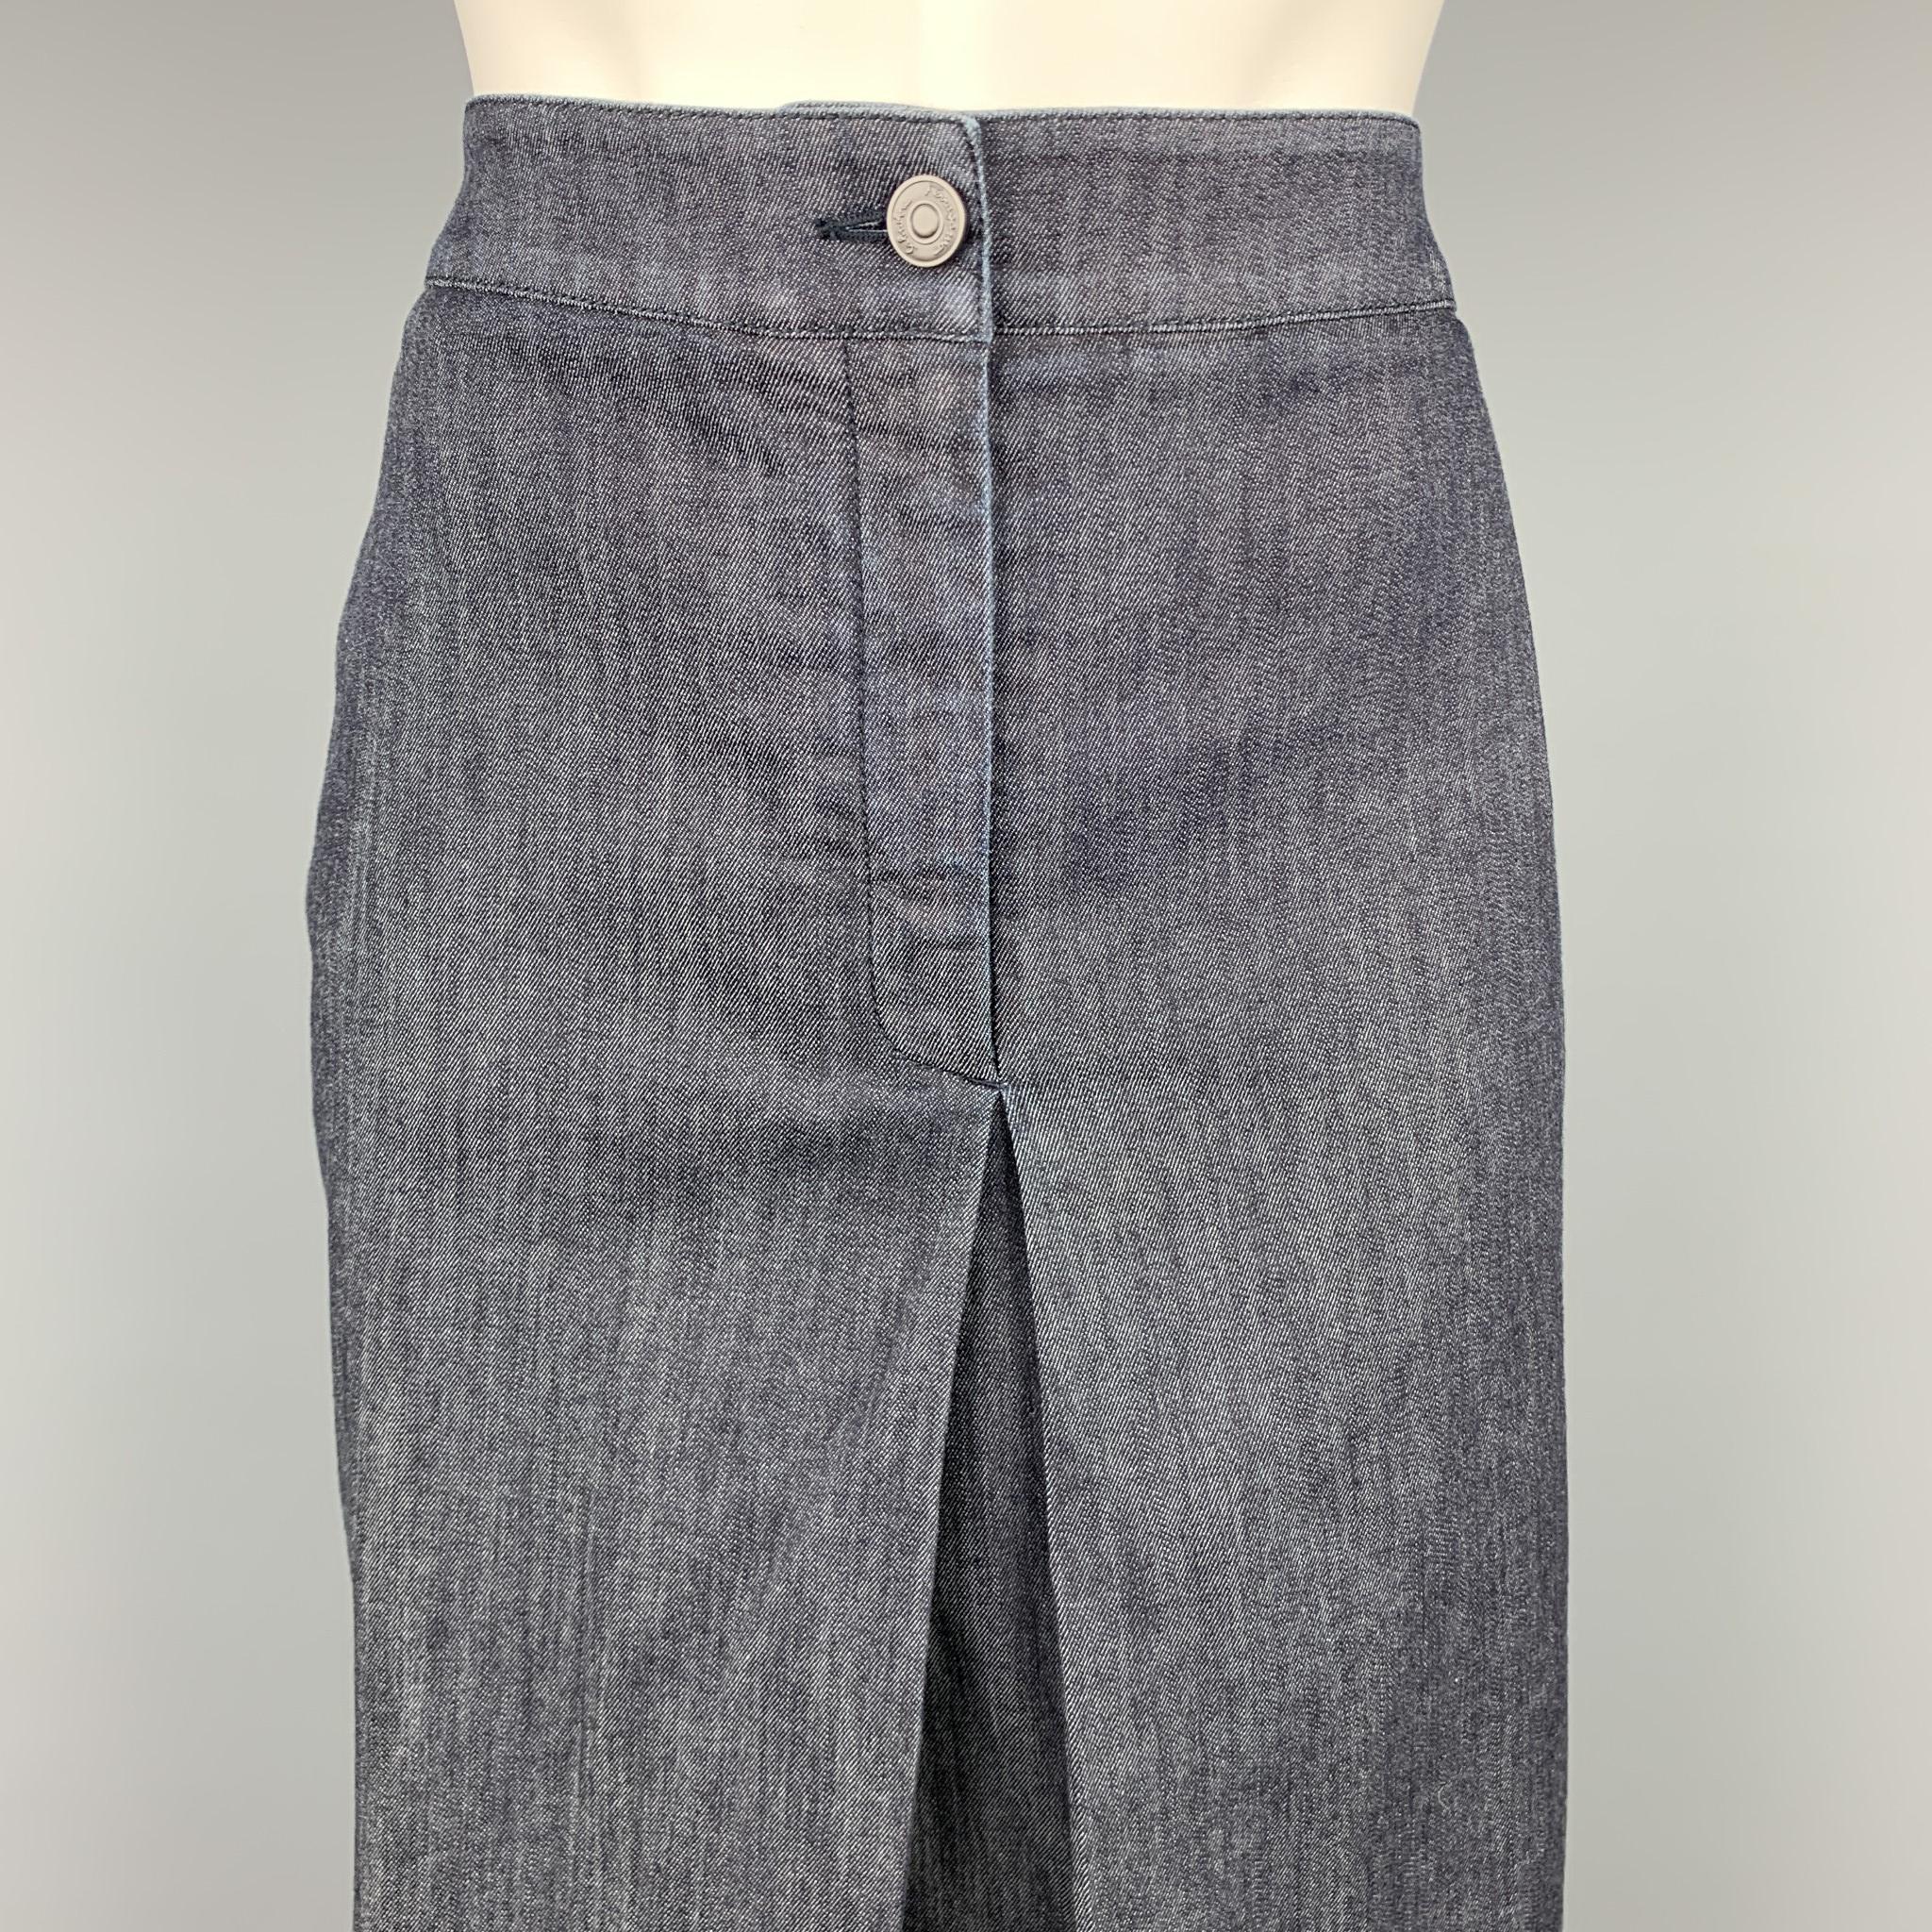 SALVATORE FERRAGAMO skirt comes in a blue denim with no liner featuring a single pleat pencil style, pockets, and a zip fly closure. Made in Italy.

New With Tags.
Marked: 46

Measurements:

Waist: 32 in. 
Hip: 38 in. 
Length: 26 in. 
Hem: 1.5 in.